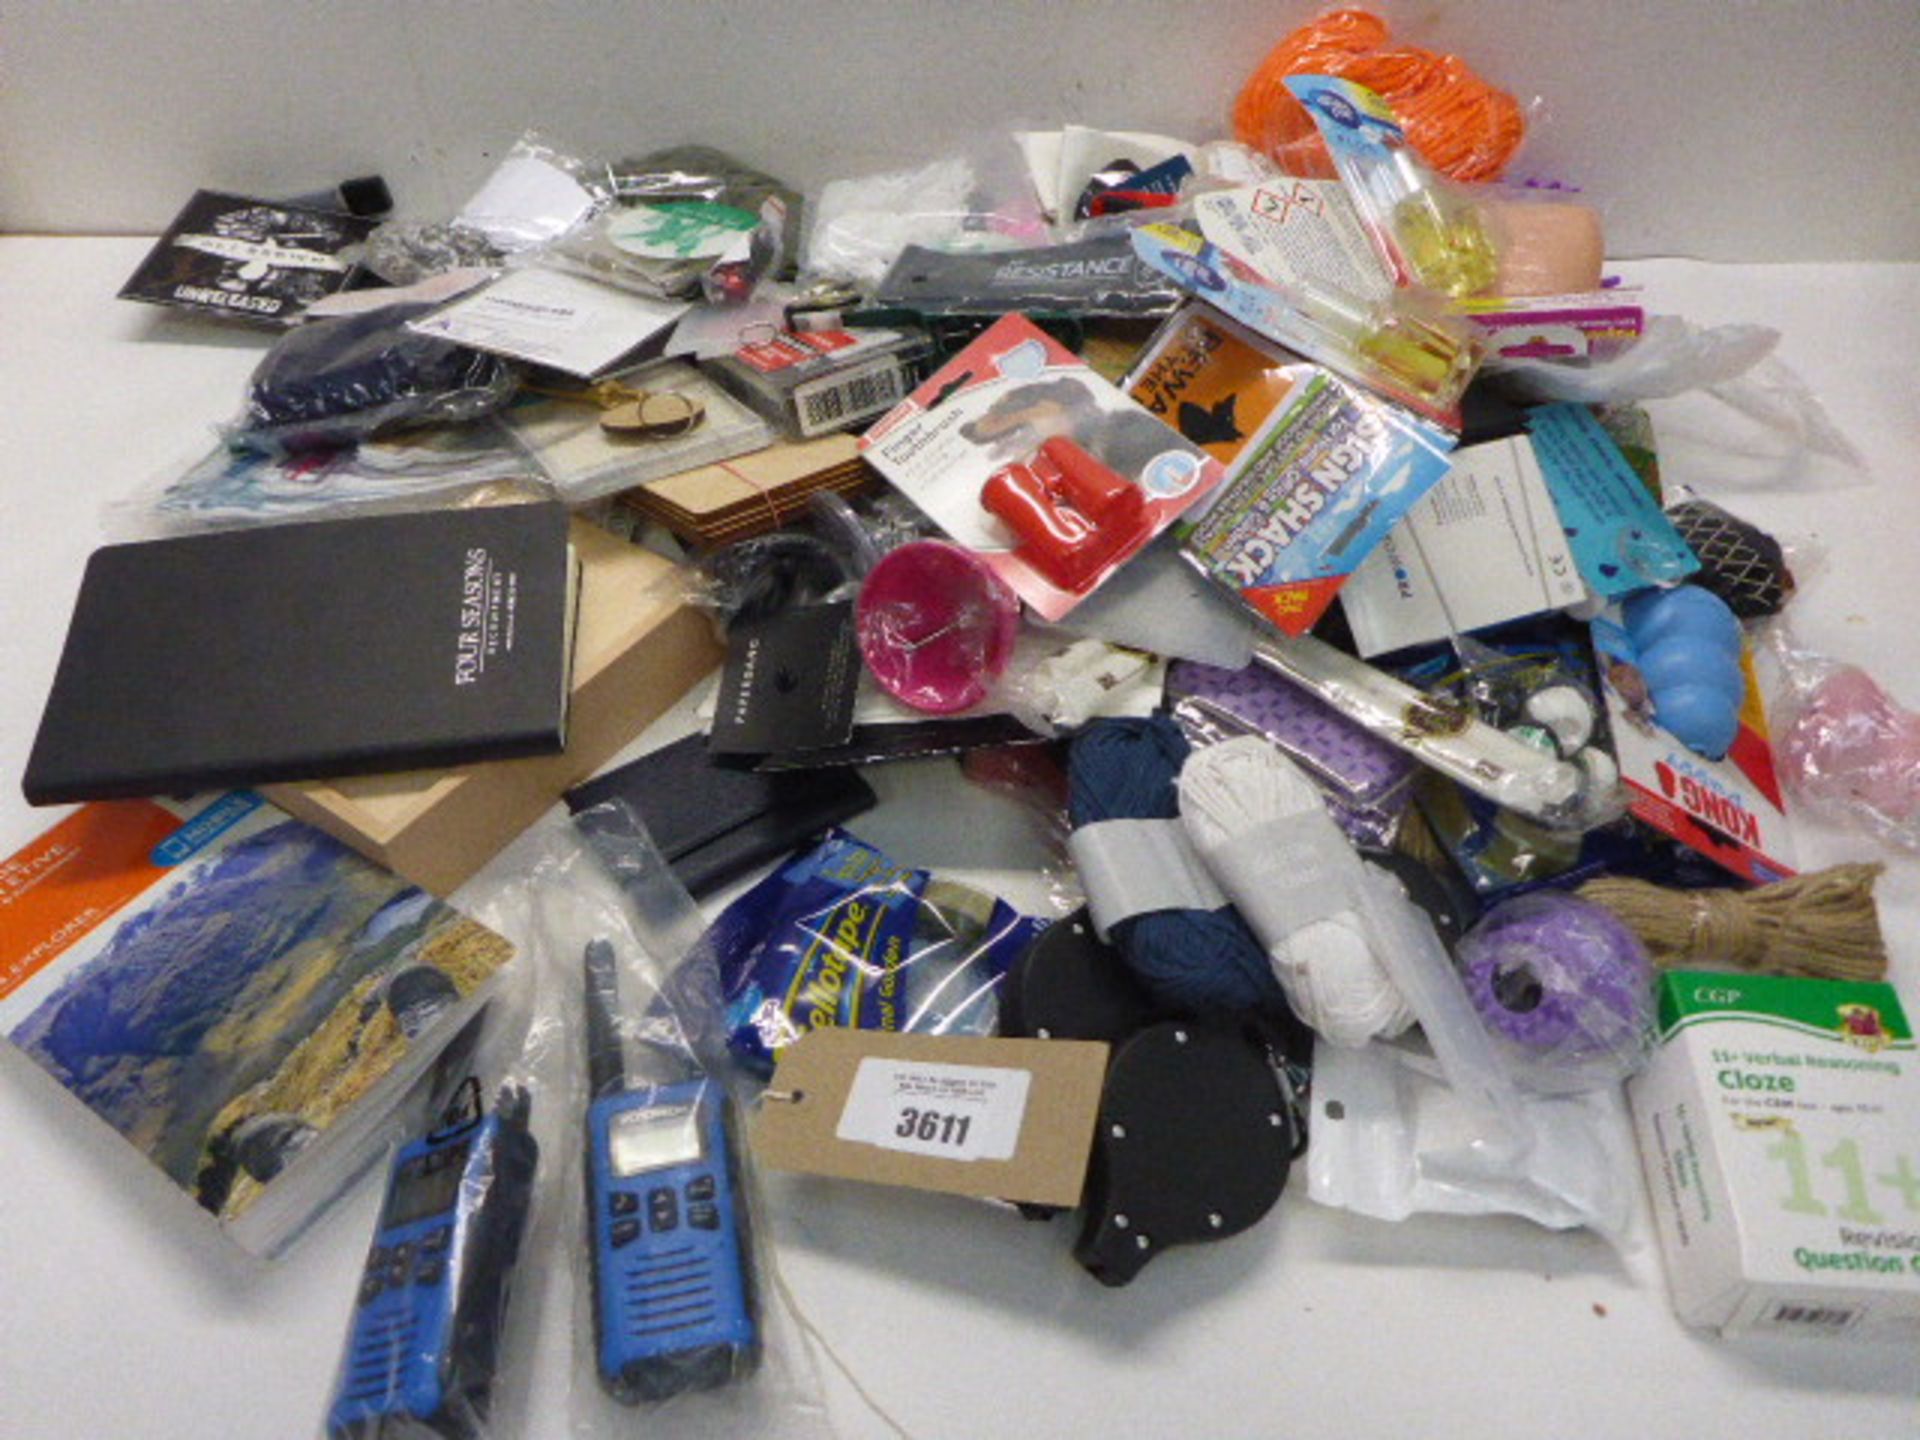 Large bag of household sundries, pet & kitchen accessories, card games, stationery etc